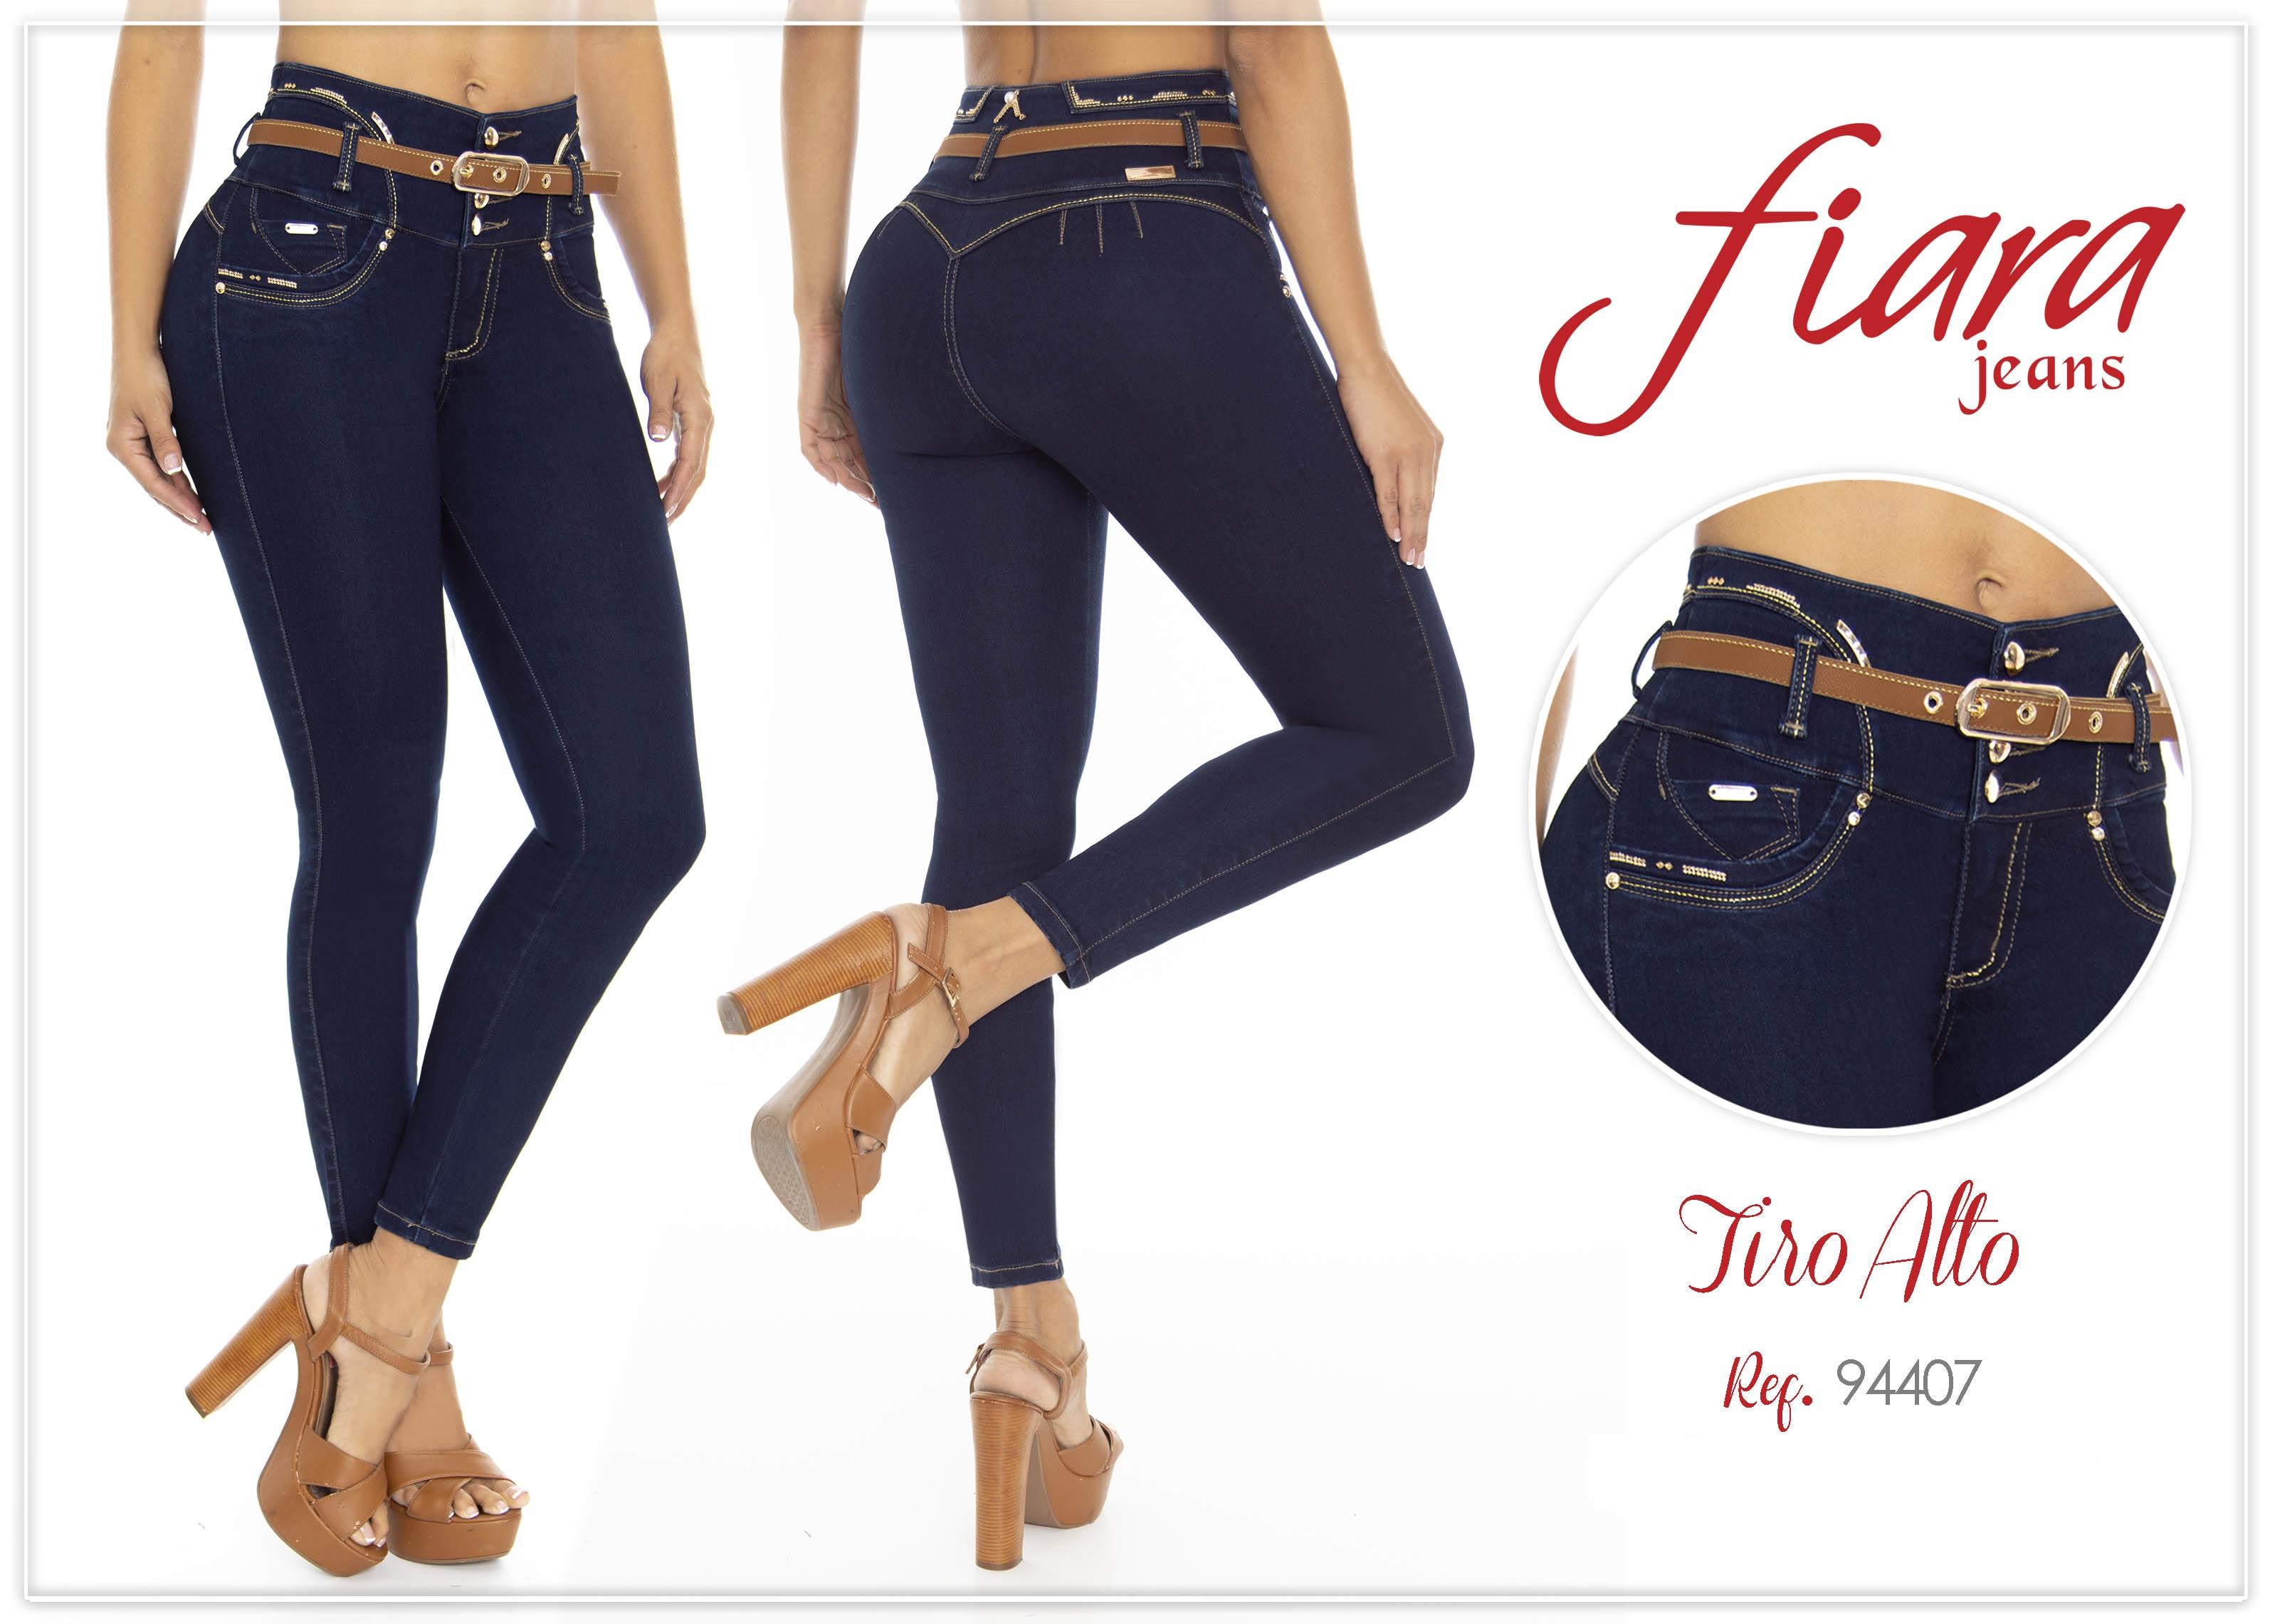 Jeans Levantacola Colombiano - Ref. 248 -94407 D